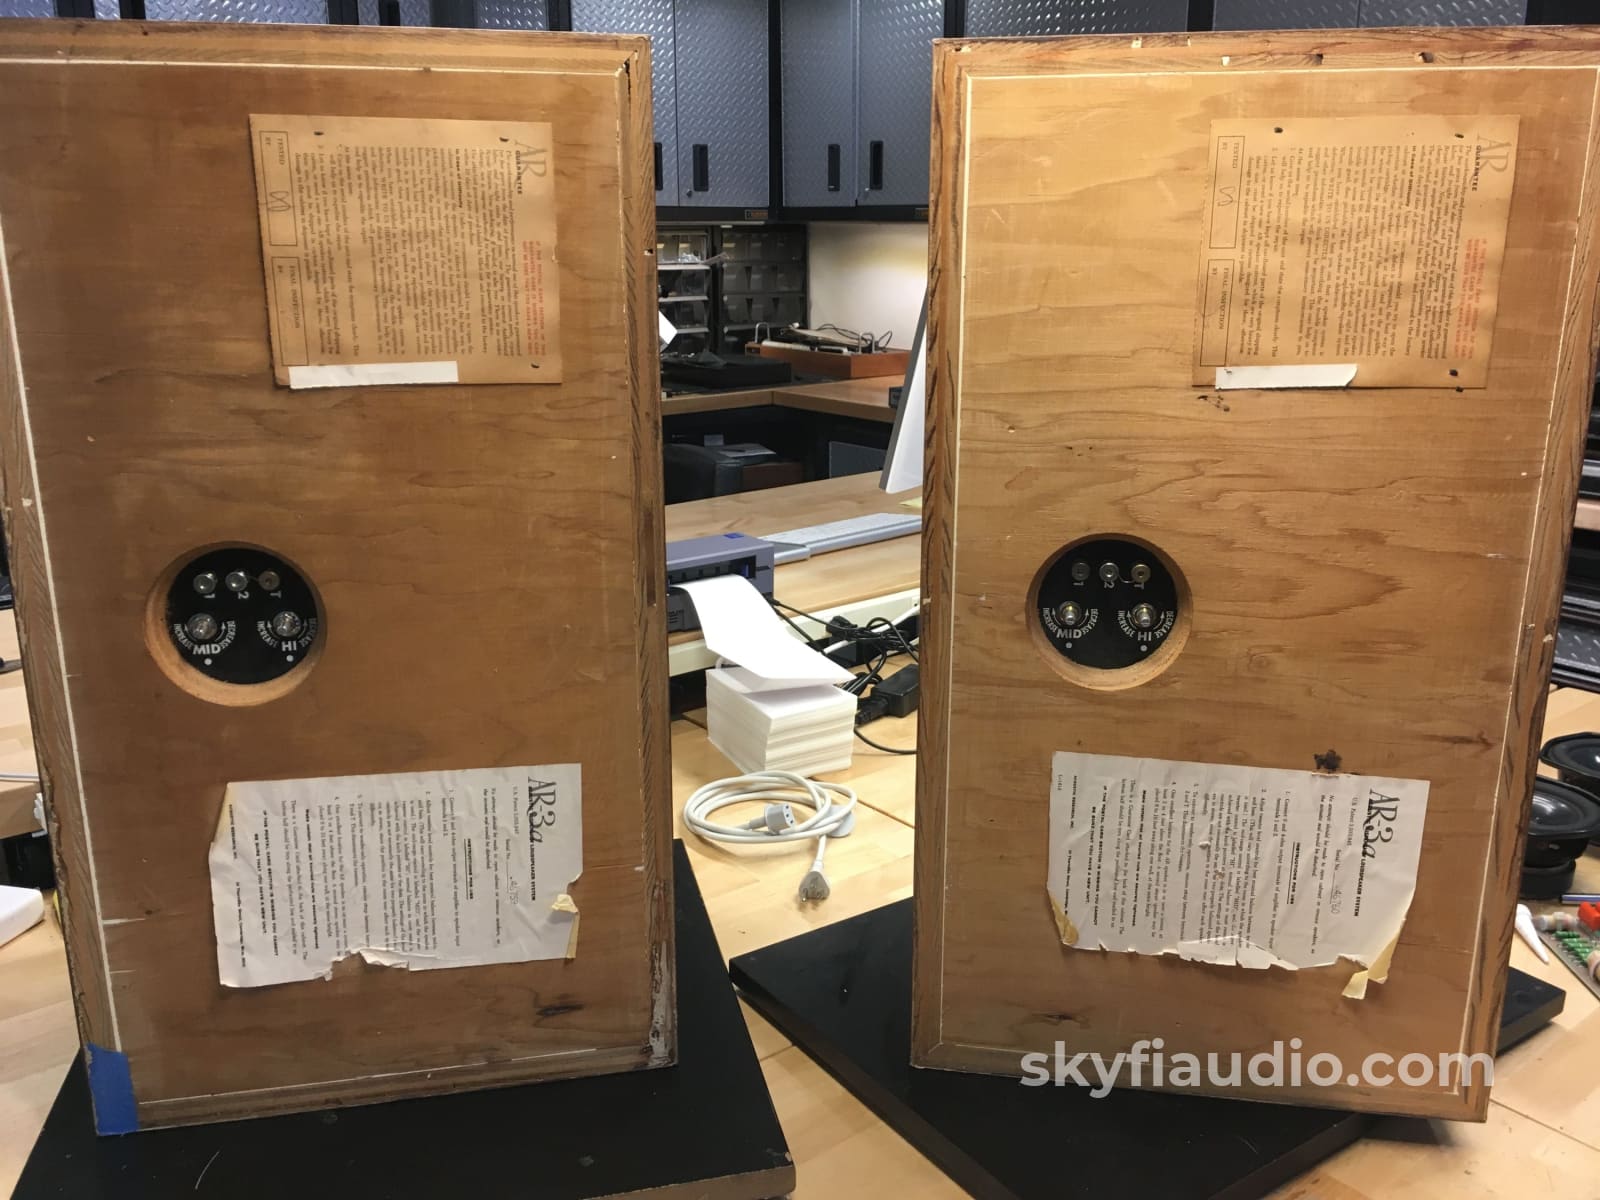 Acoustic Research Ar-3A Speakers